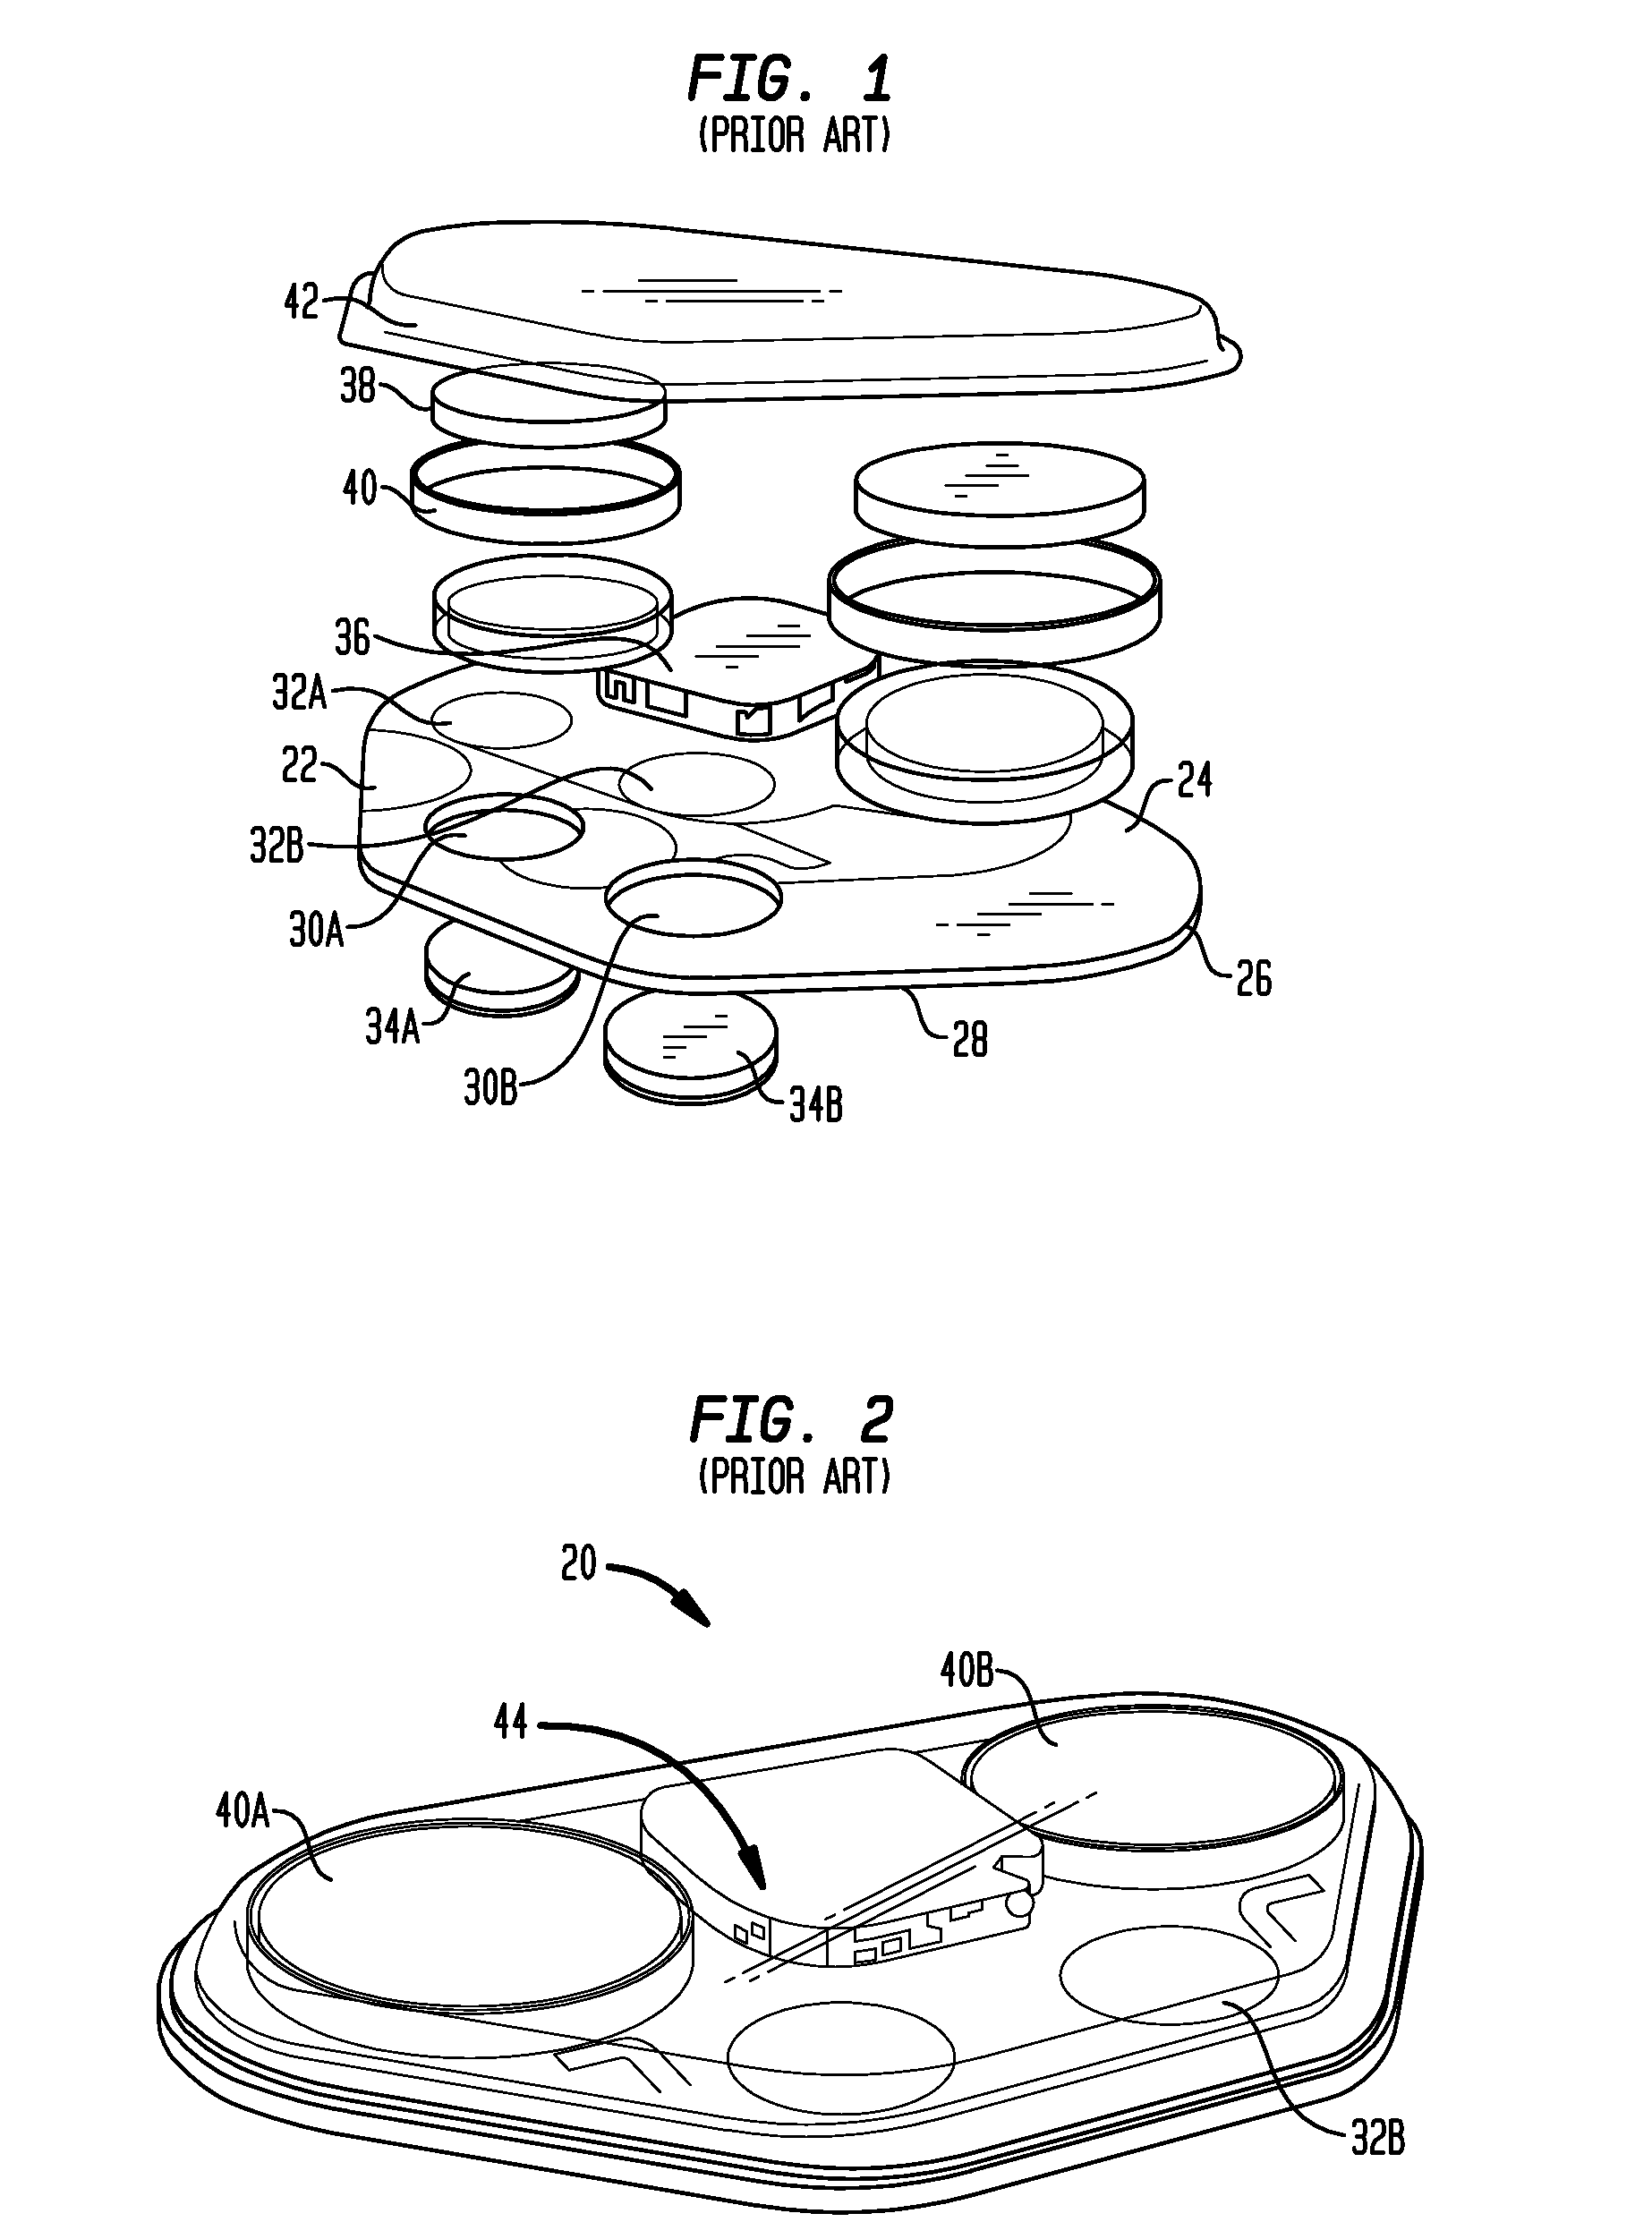 Nerve Stimulation Patches And Methods For Stimulating Selected Nerves